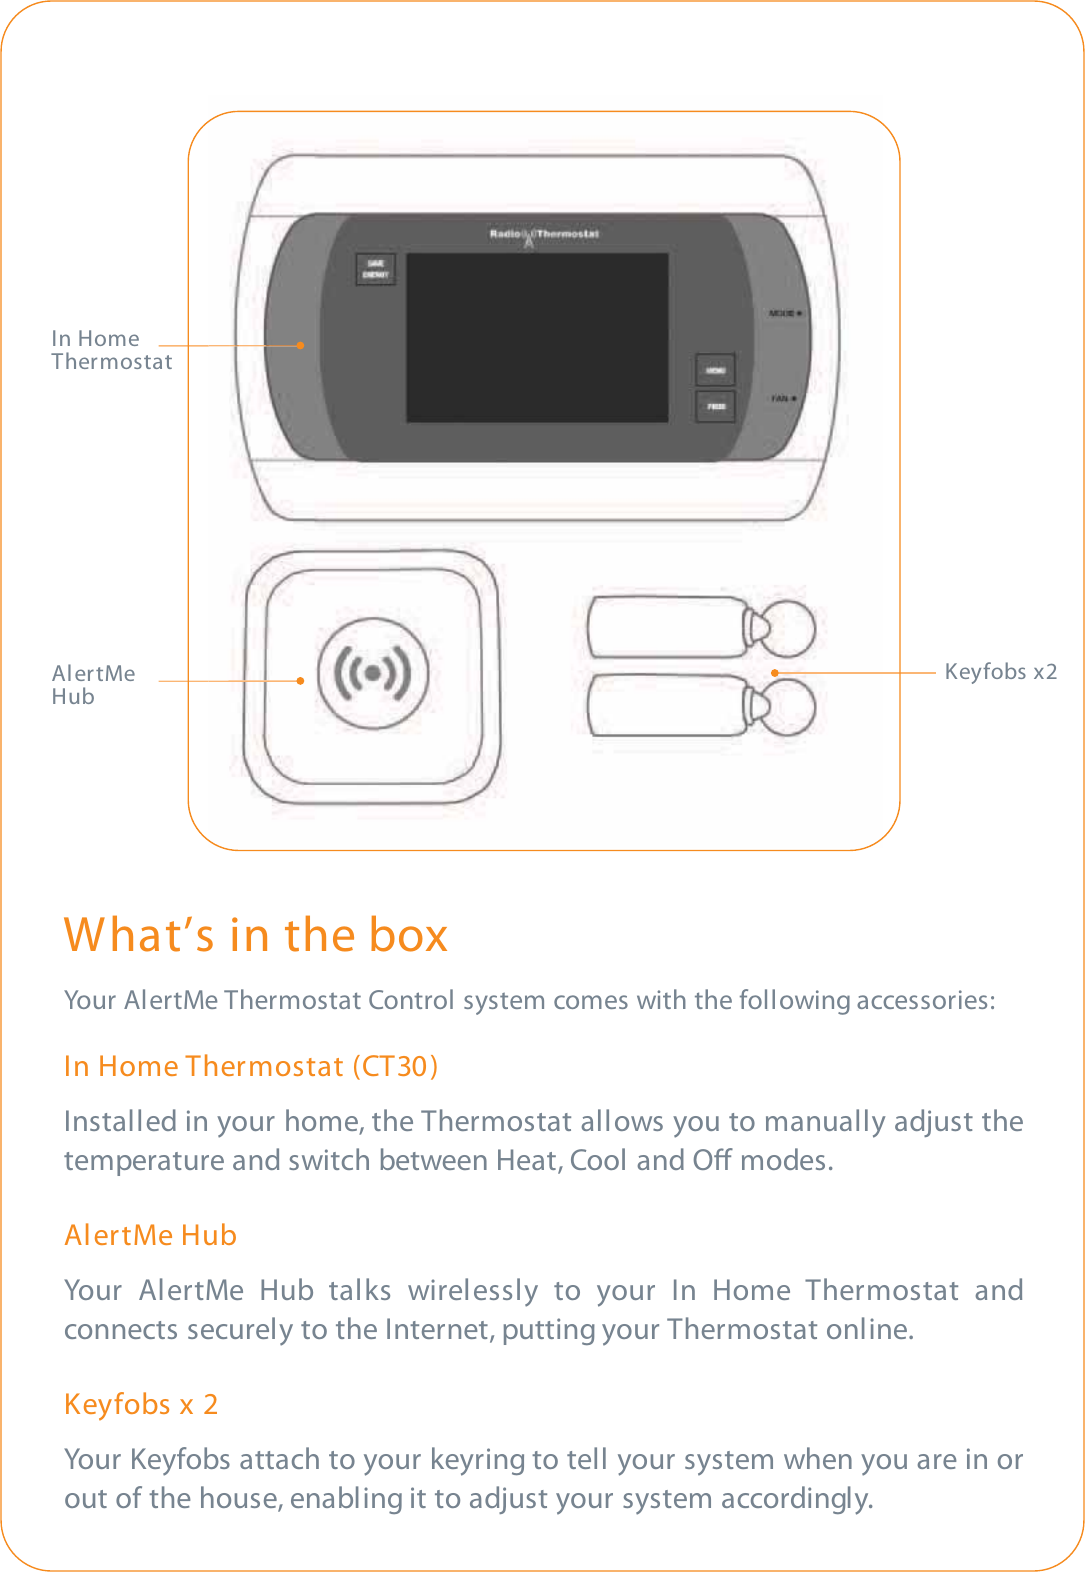 What’s in the boxYour AlertMe Thermostat Control system comes with the following accessories:In Home Thermostat (CT30)Installed in your home, the Thermostat allows you to manually adjust thetemperature and switch between Heat, Cool and O modes.AlertMe HubYour AlertMe Hub talks wirelessly to your In Home Thermostat andconnects securely to the Internet, putting your Thermostat online.Keyfobs x 2Your Keyfobs attach to your keyring to tell your system when you are in orout of the house, enabling it to adjust your system accordingly.Keyfobs x2In HomeThermostatAlertMeHub